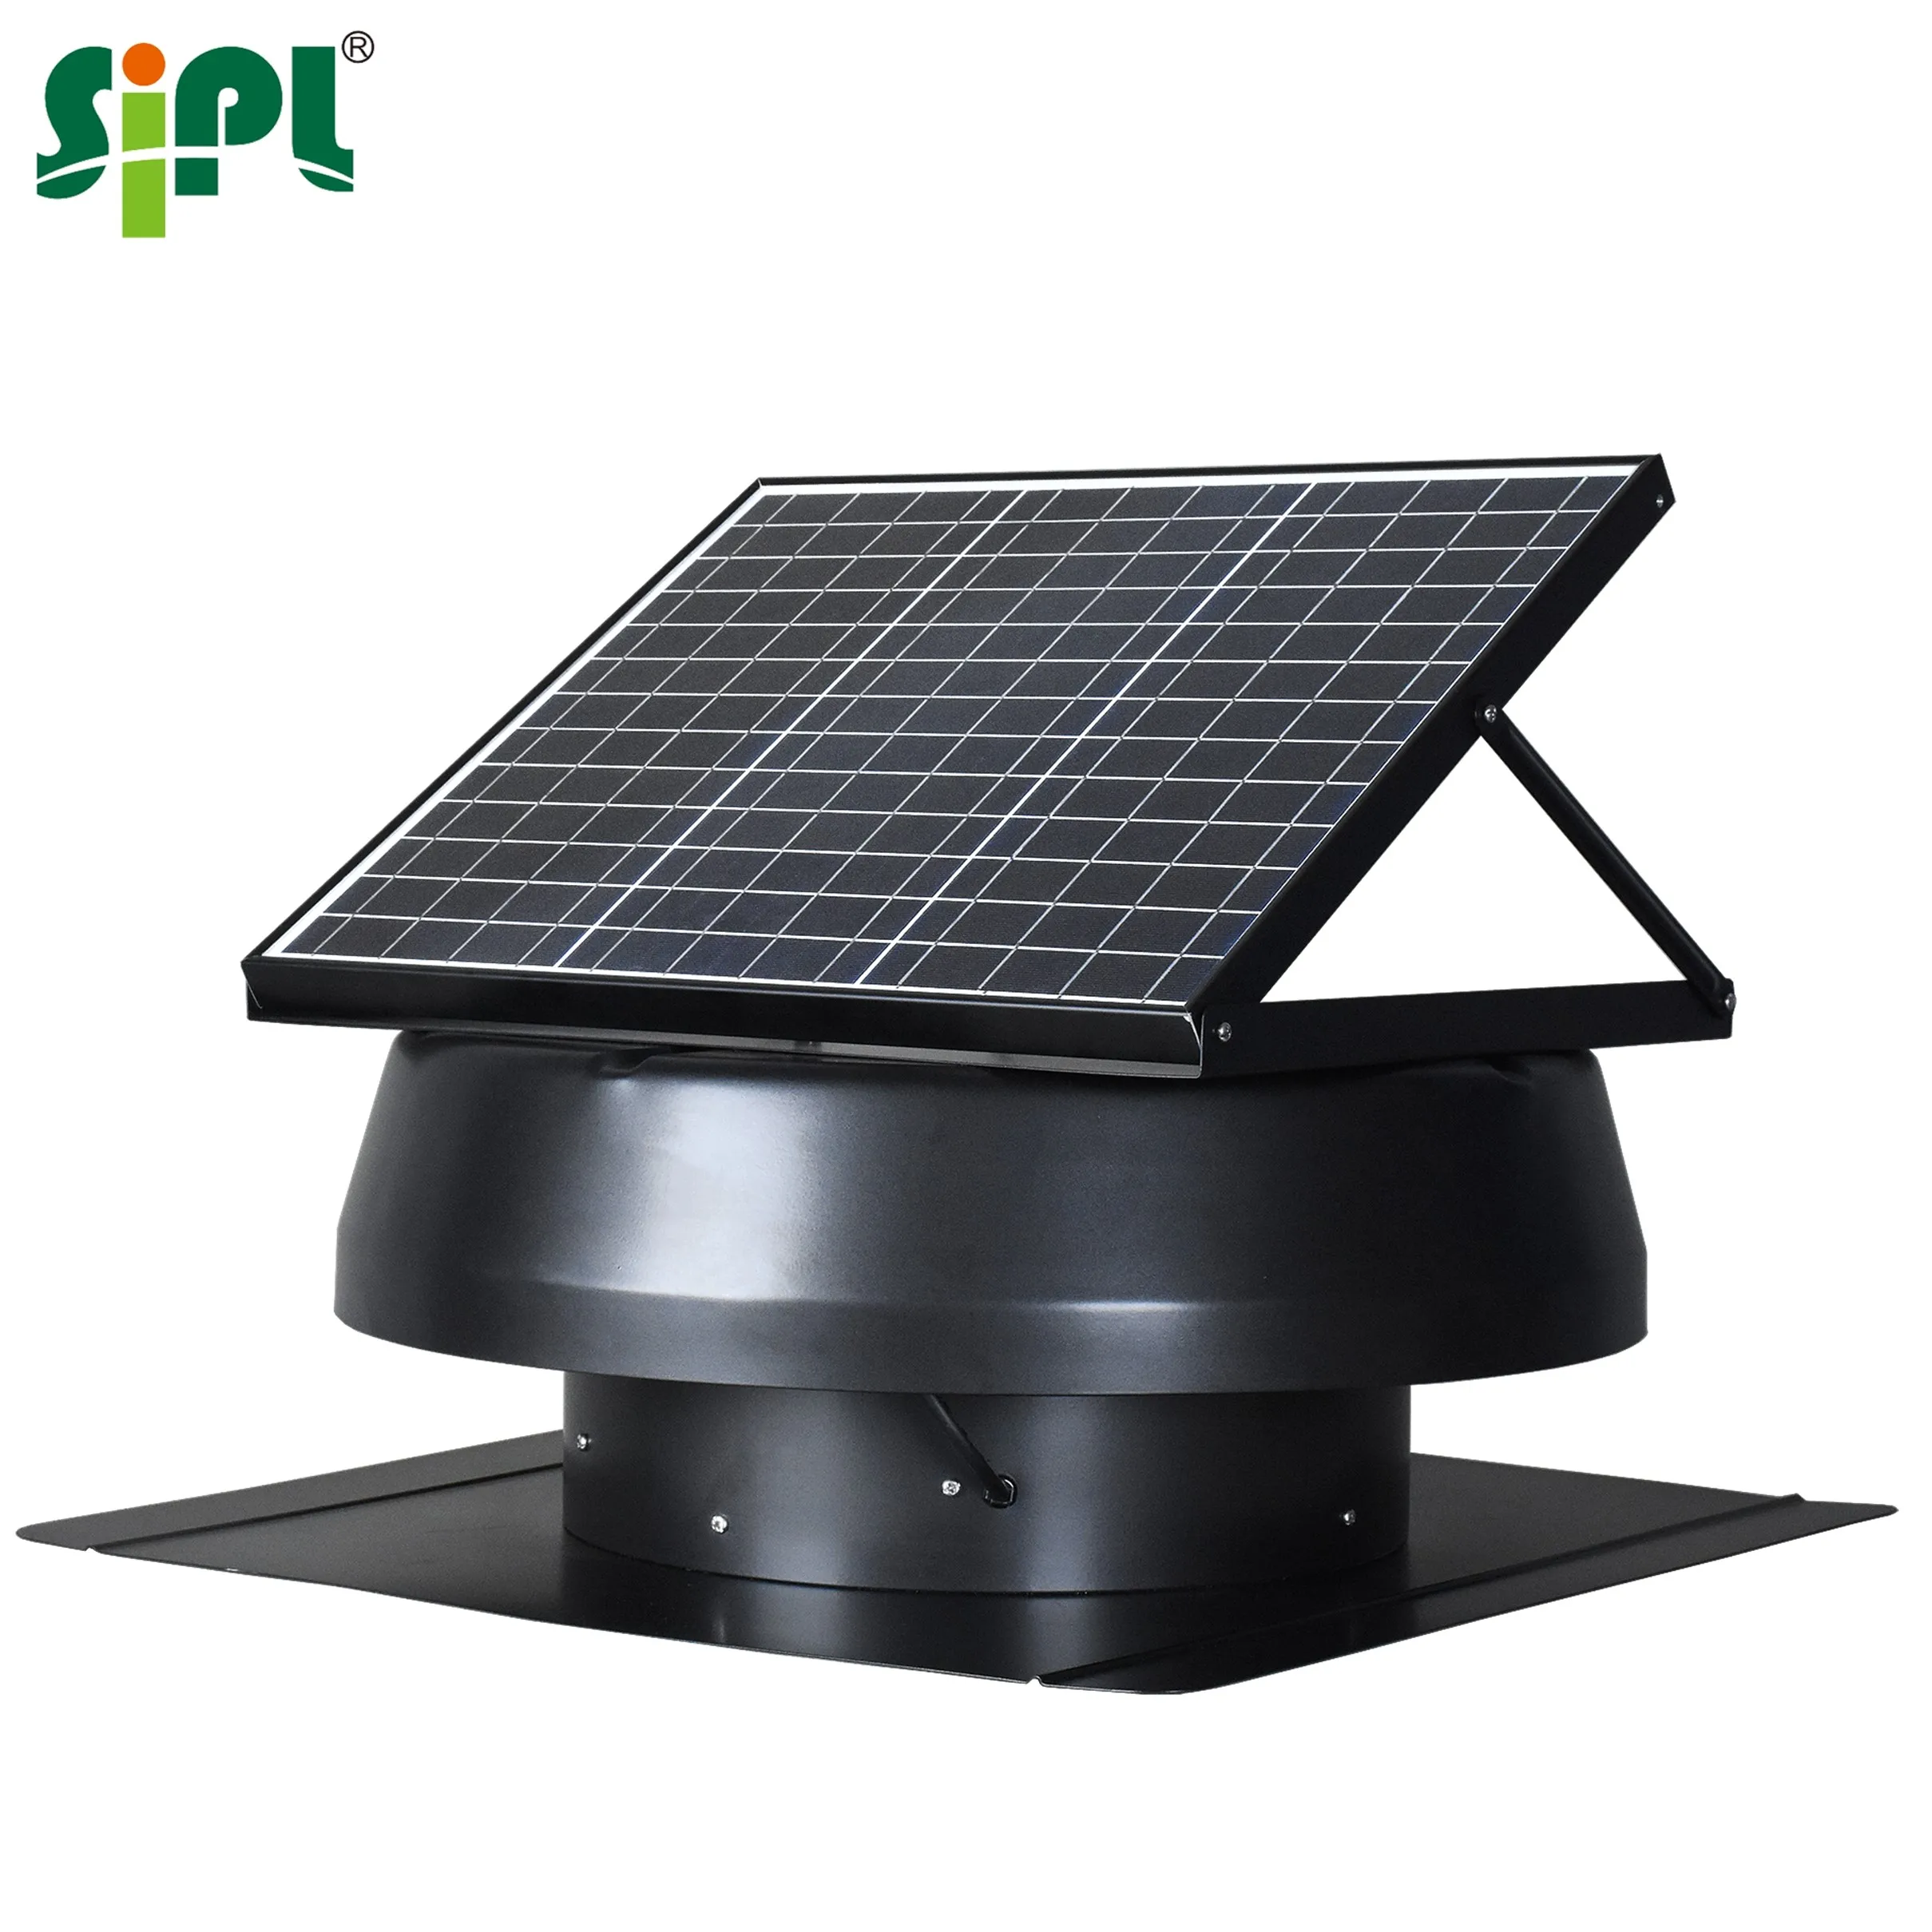 Solar Powered Exhaust Fan Vent Ventilation Stainless Steel f Roof Atti